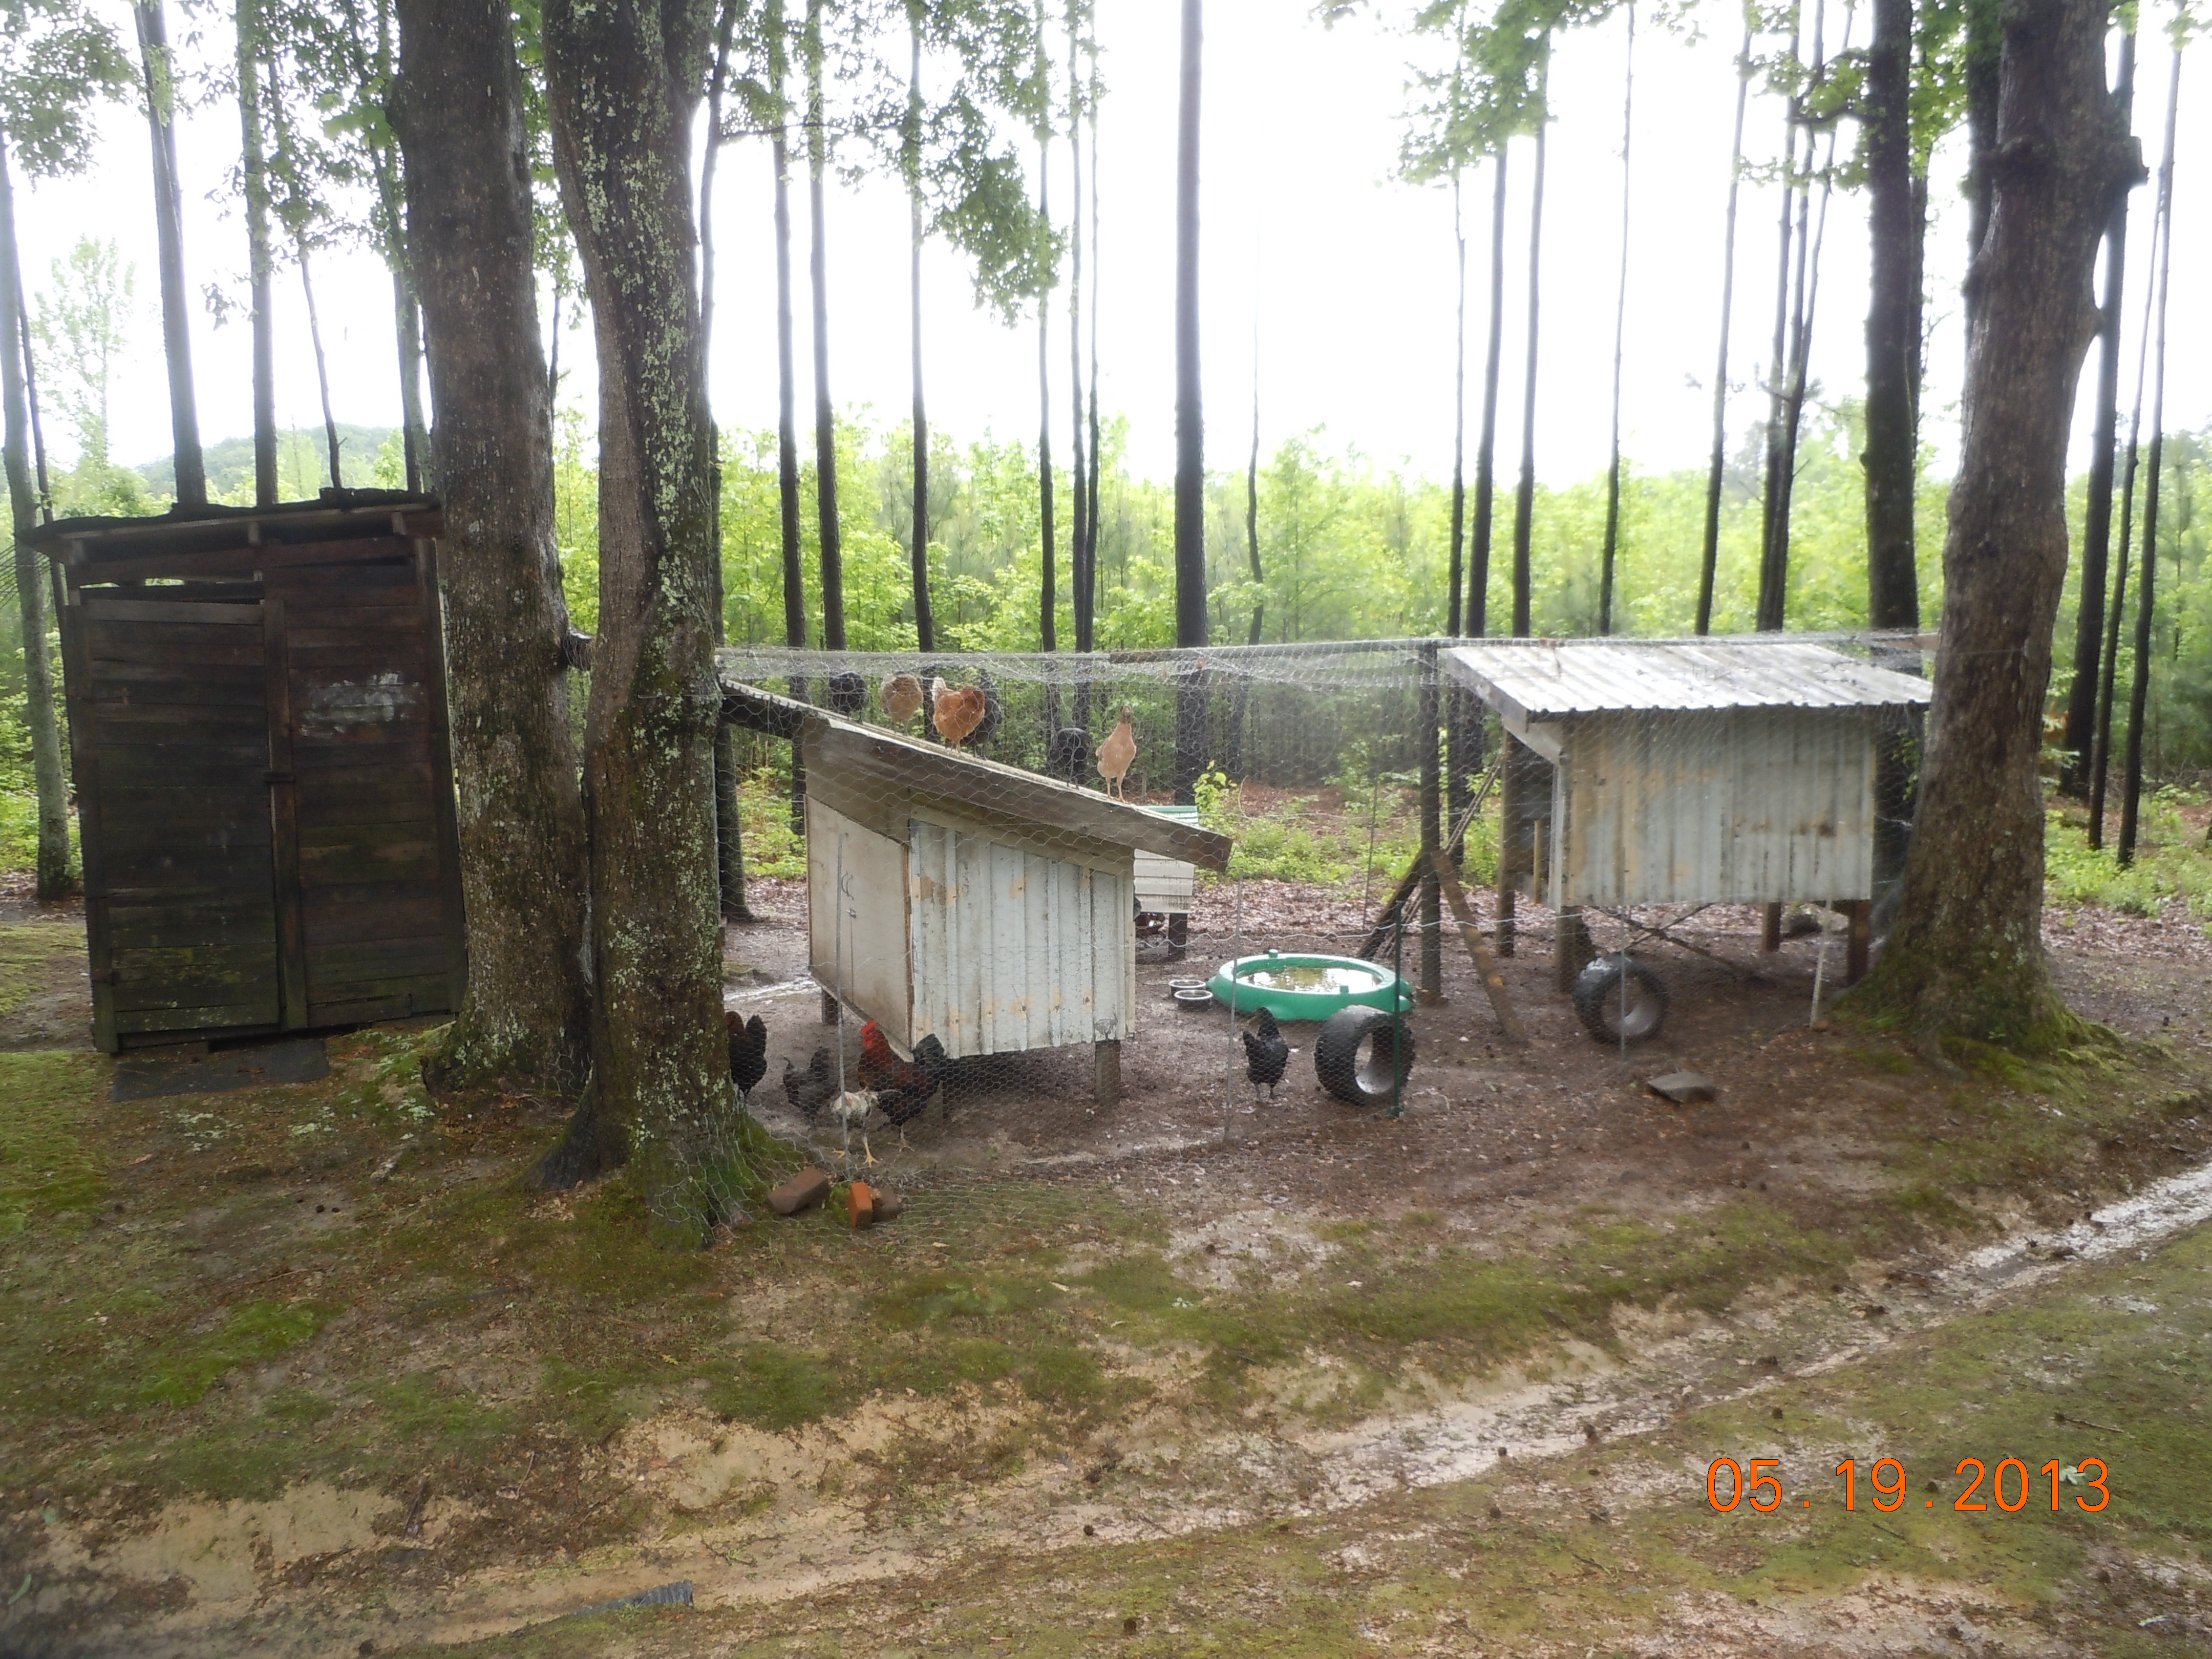 The run - Hen house is on the left; roost house is on the right